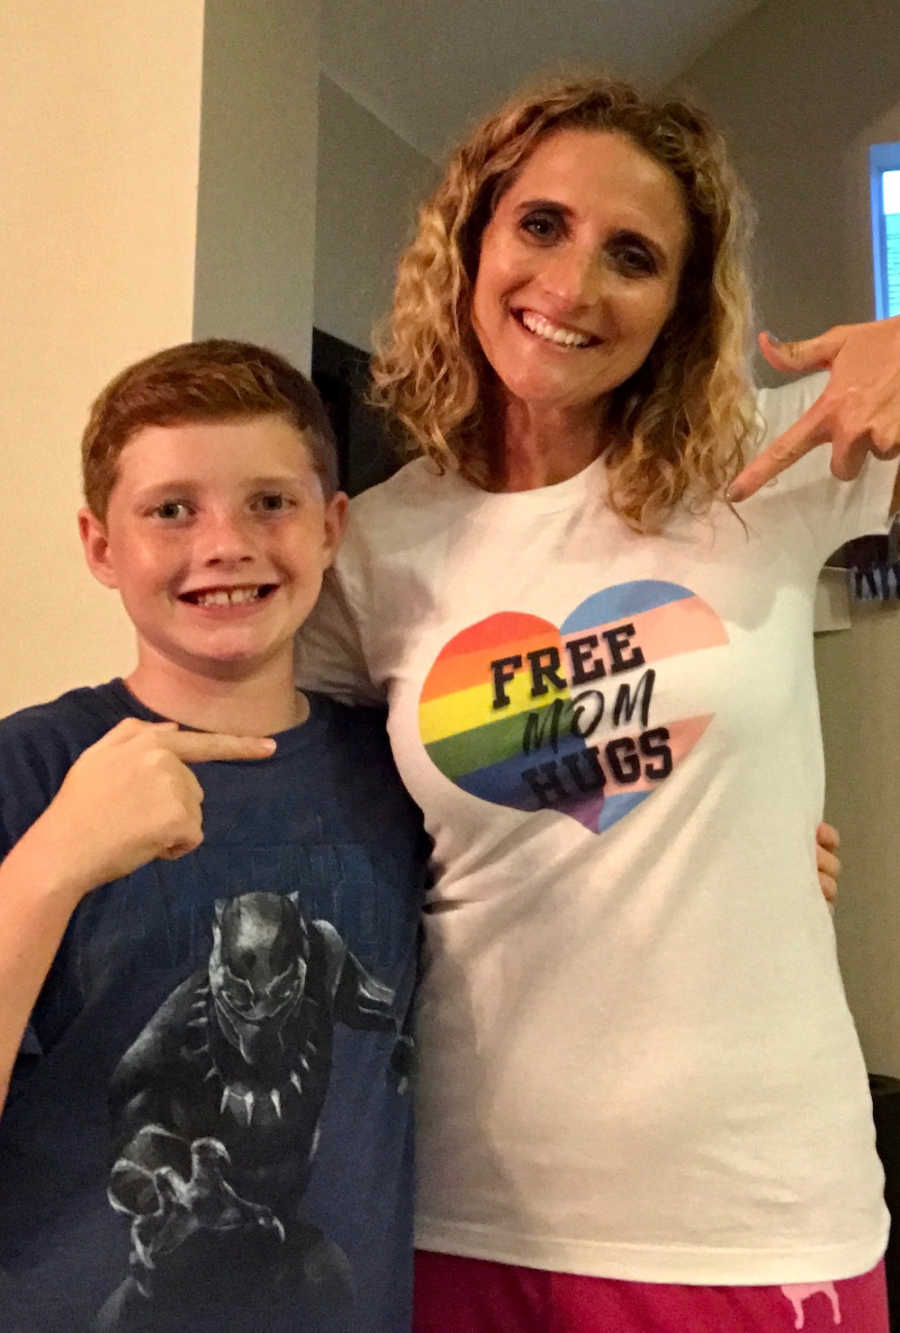 Mother smiles beside her trans child pointing to her shirt that says, "Free mom hugs"